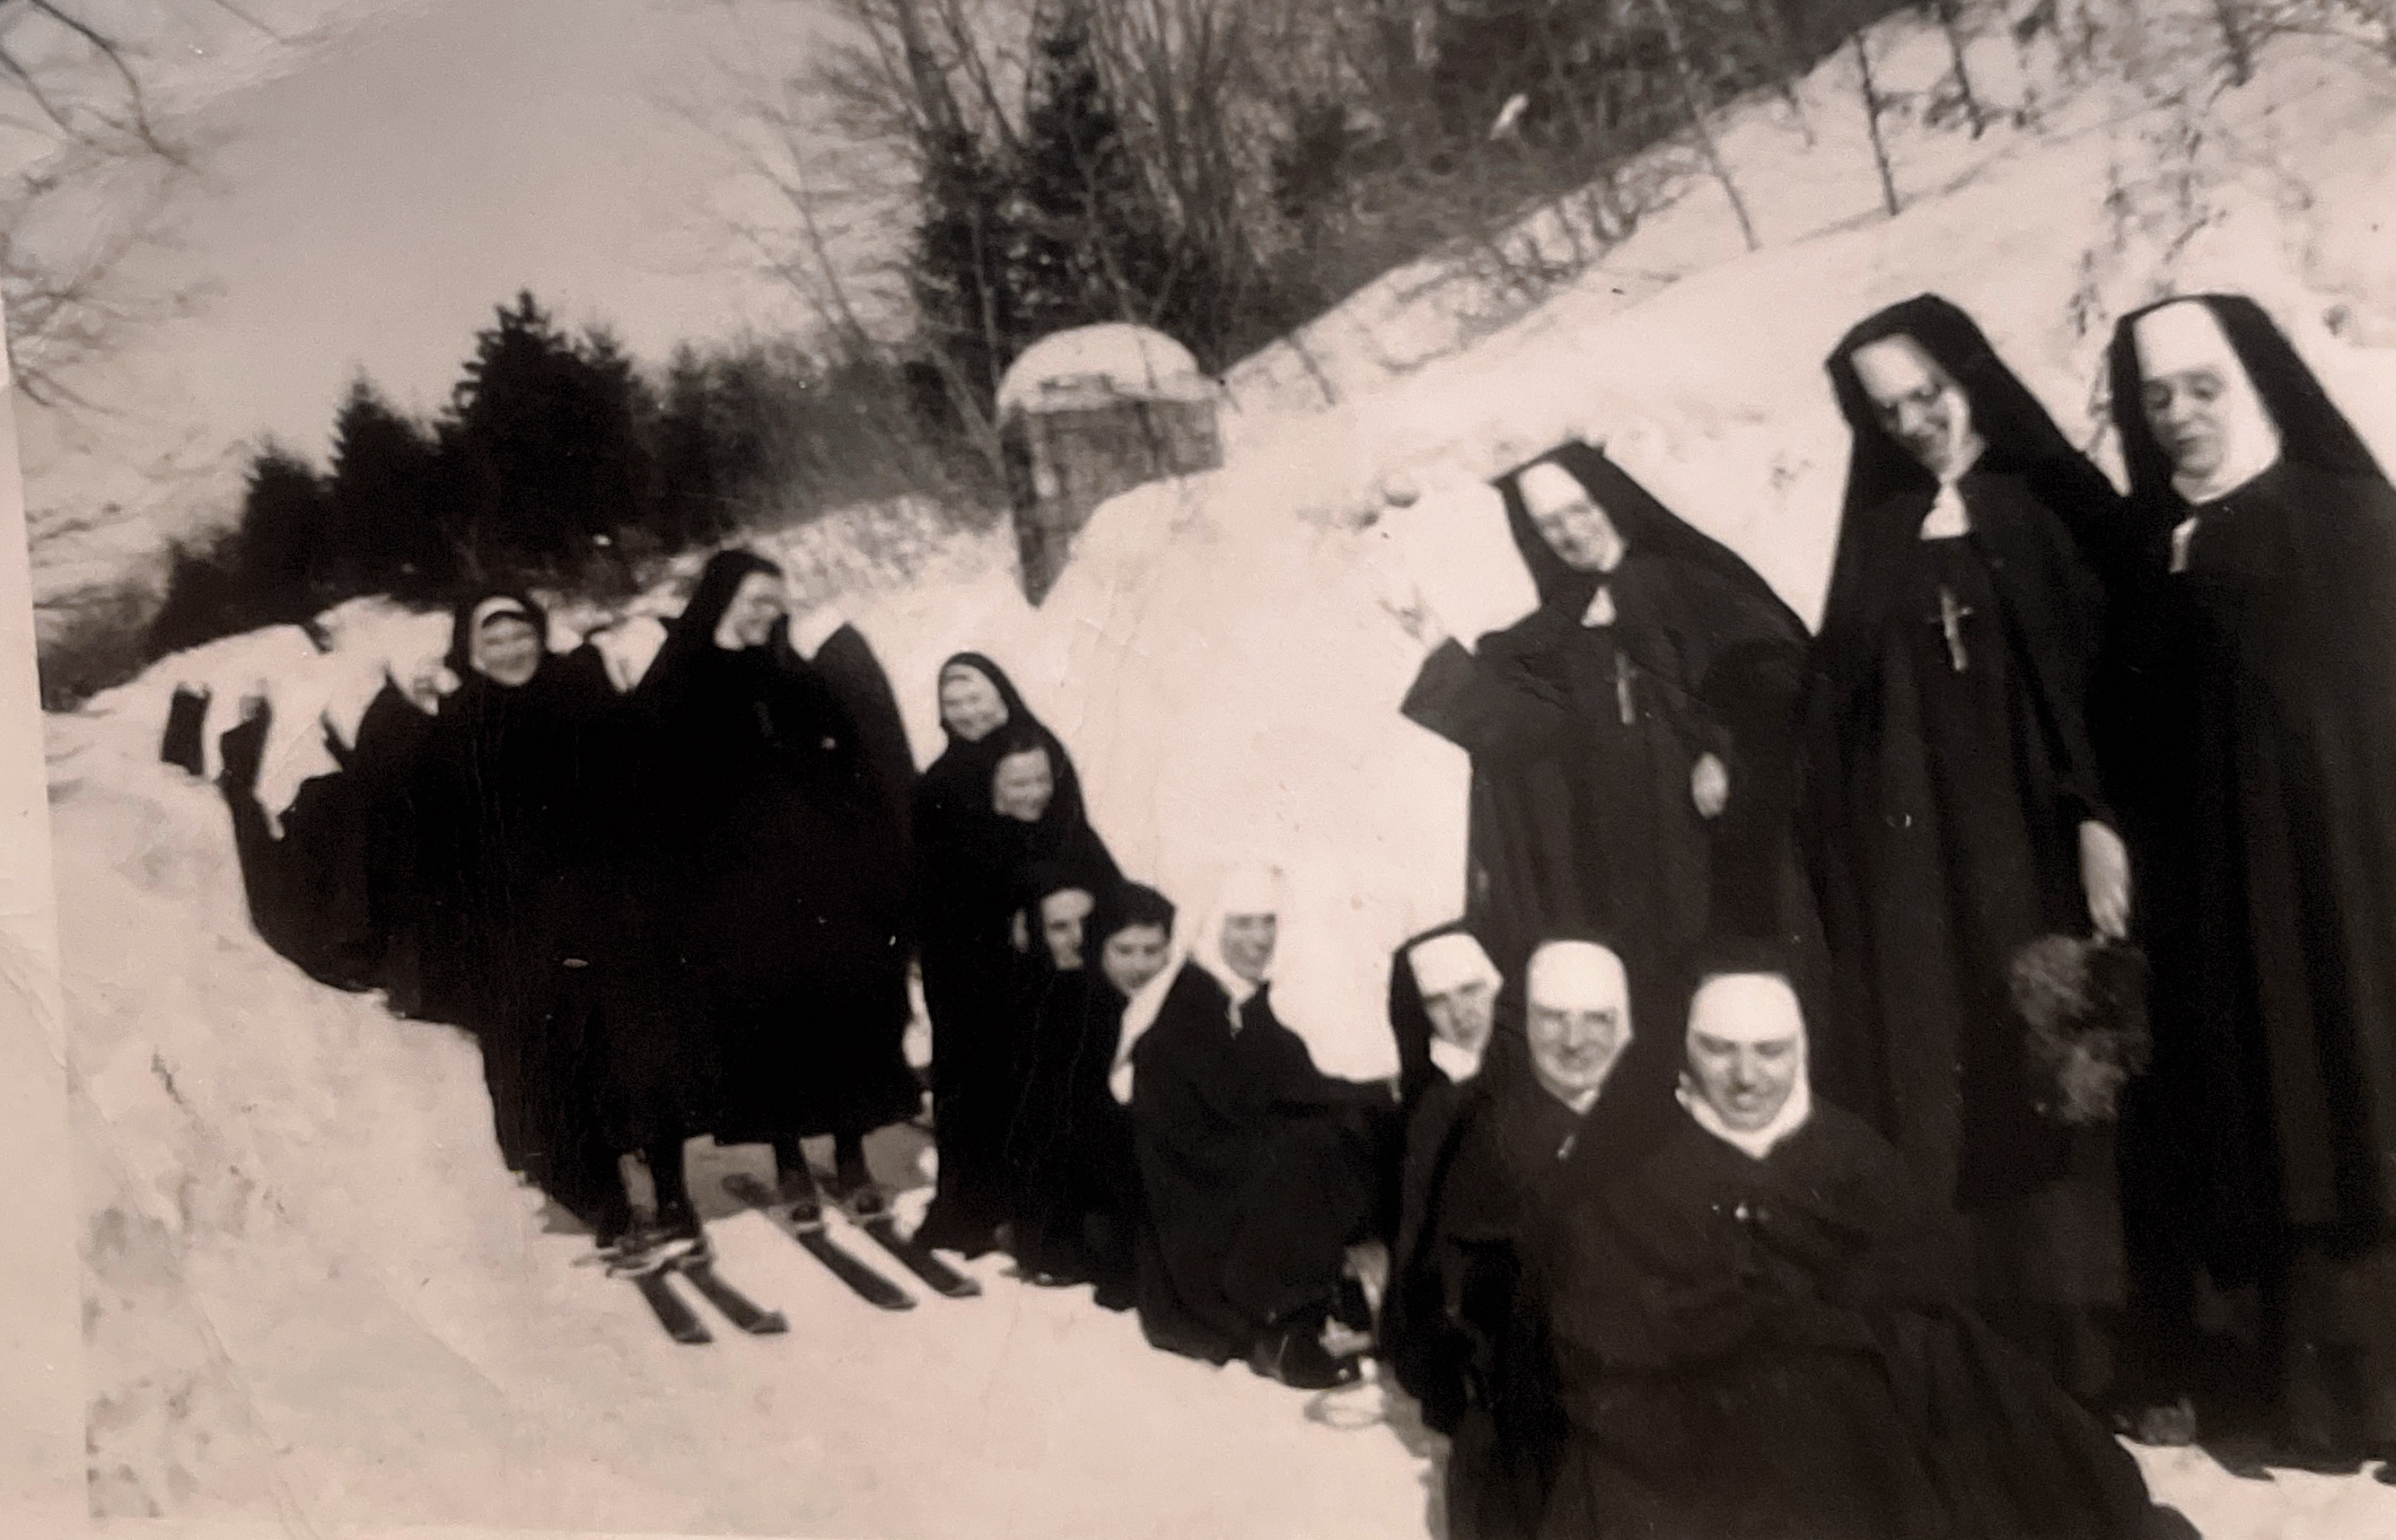 1950’s when the nun’s went skiing